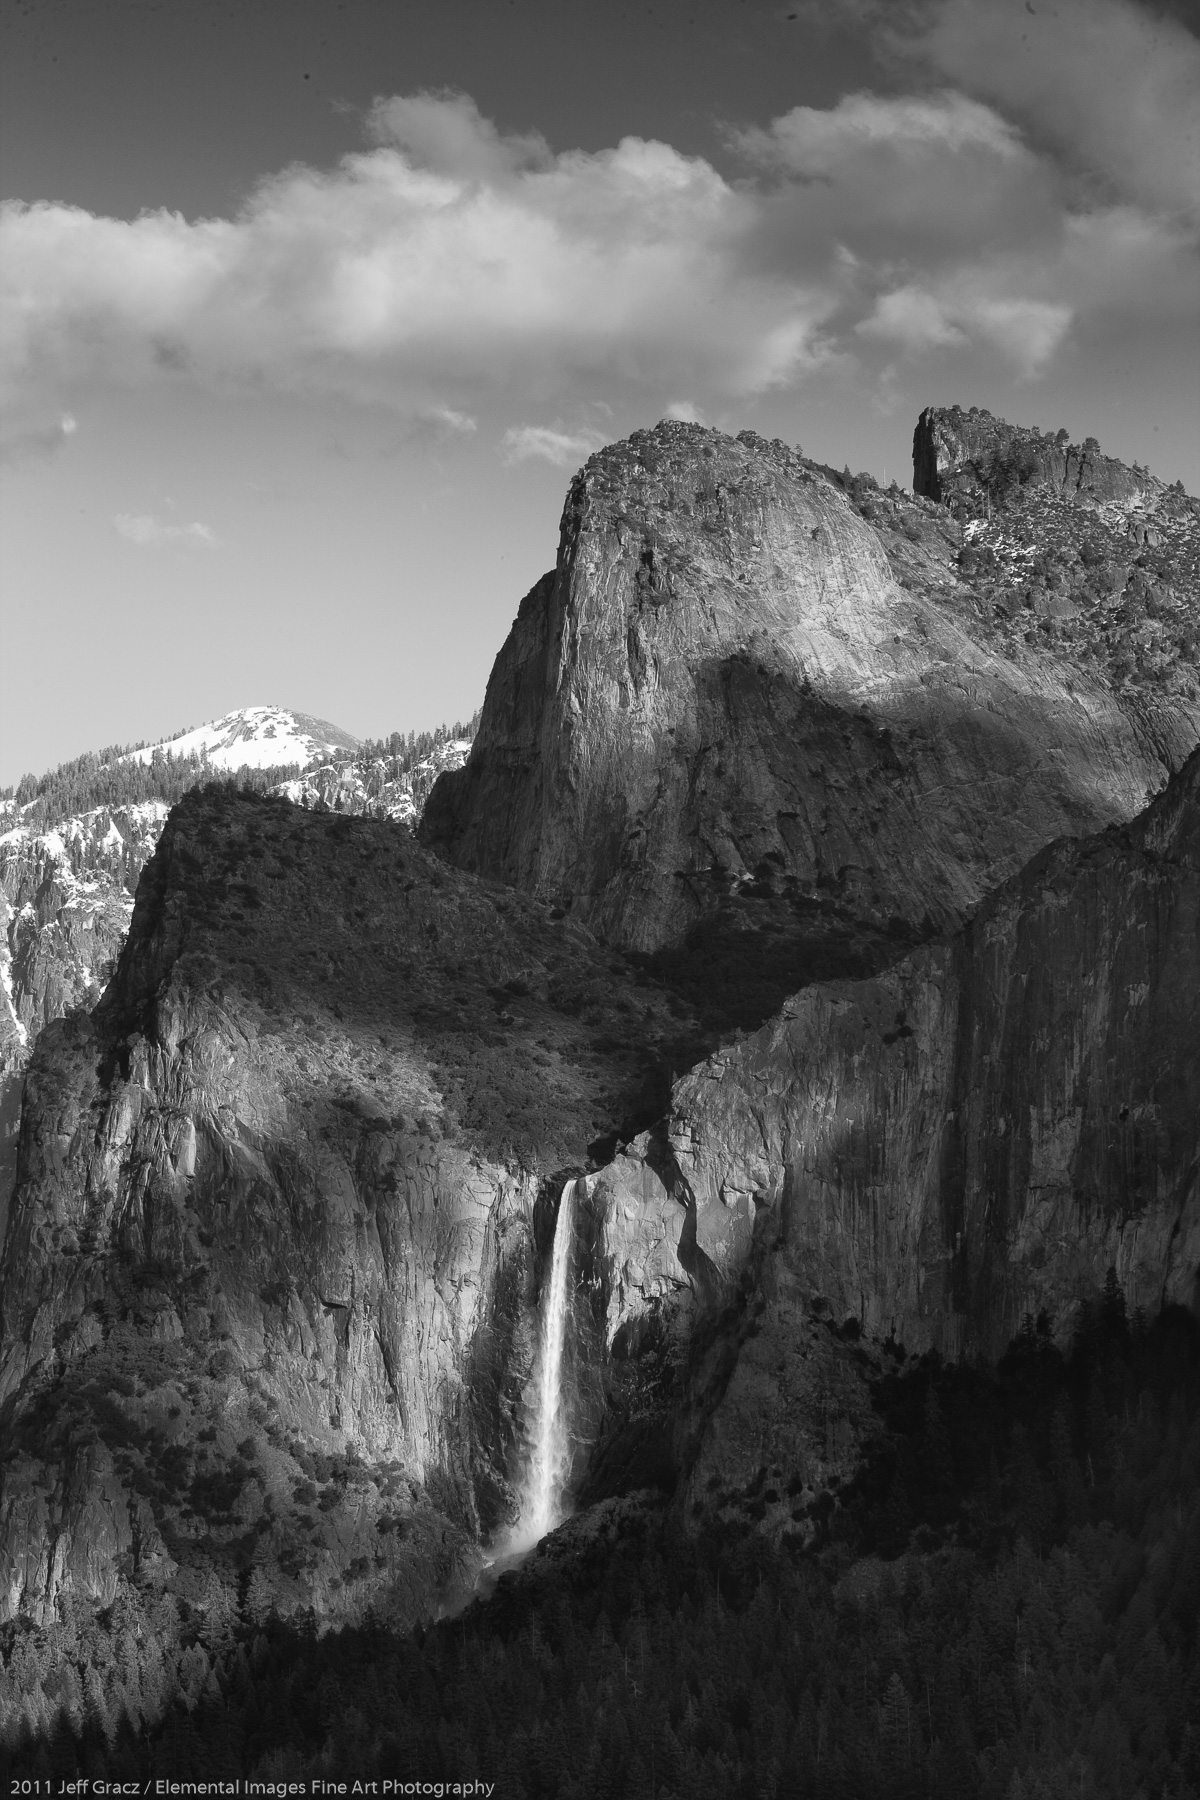 Bridalveil Falls with Cathedral Rocks | Yosemite National Park | CA | USA - © 2011 Jeff Gracz / Elemental Images Fine Art Photography - All Rights Reserved Worldwide